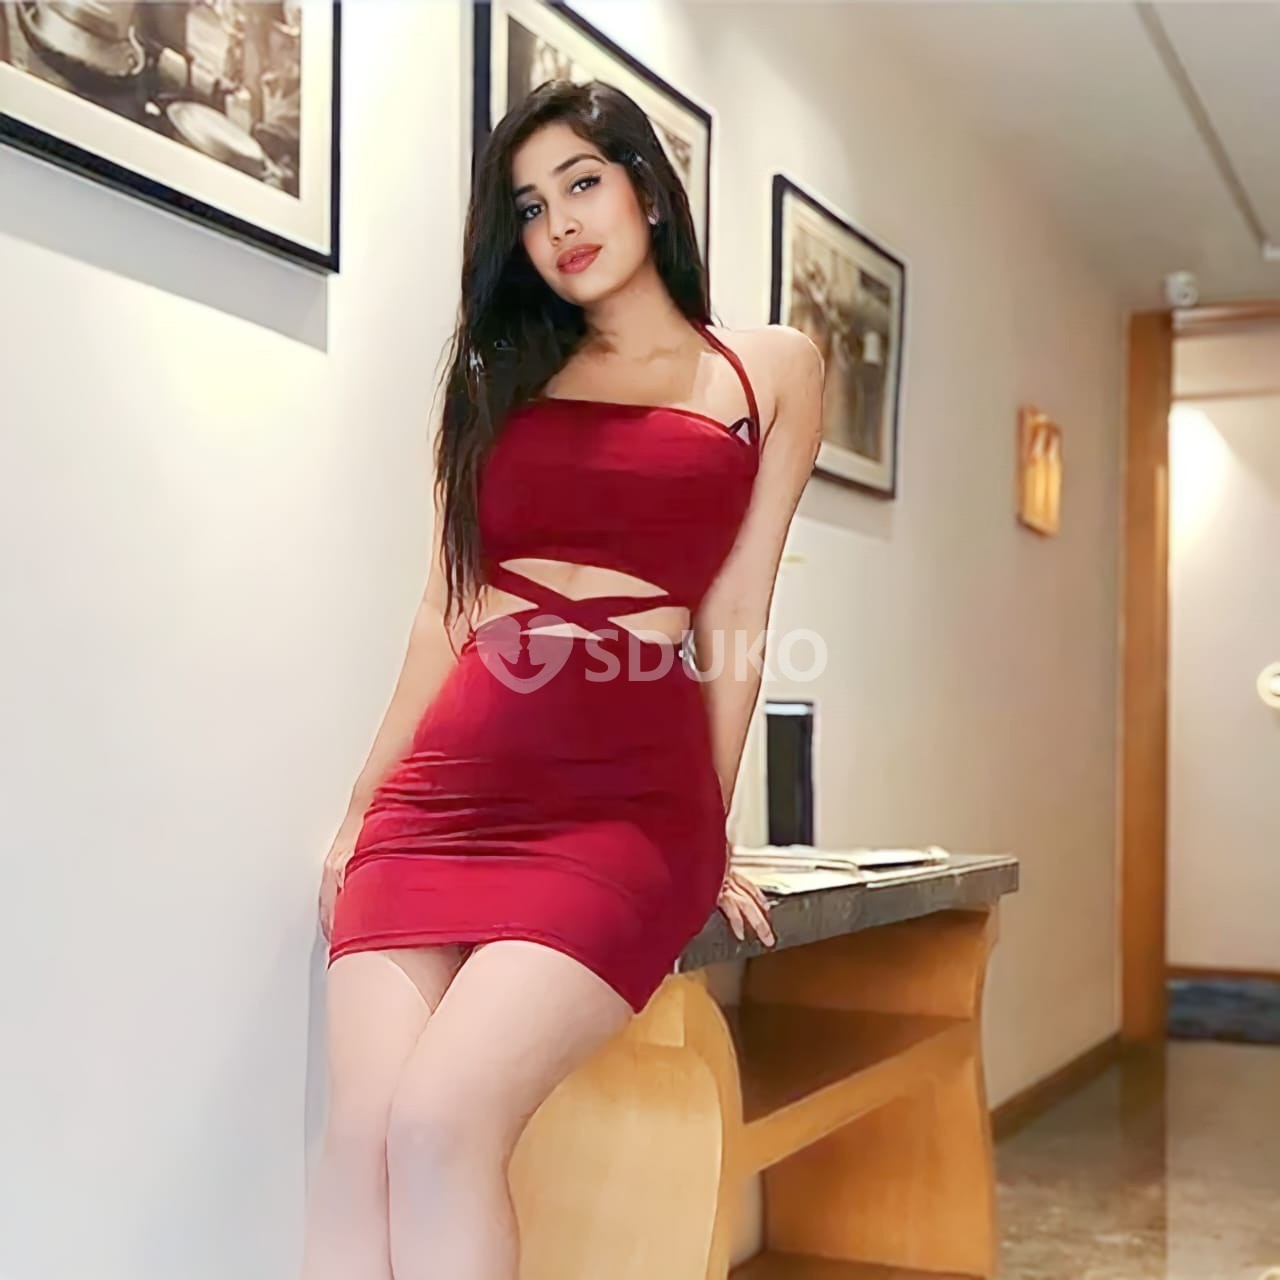 KHARADI 🌟BEST CALL GIRL INDEPENDENT ESCORT SERVICE IN LOW BUDGET